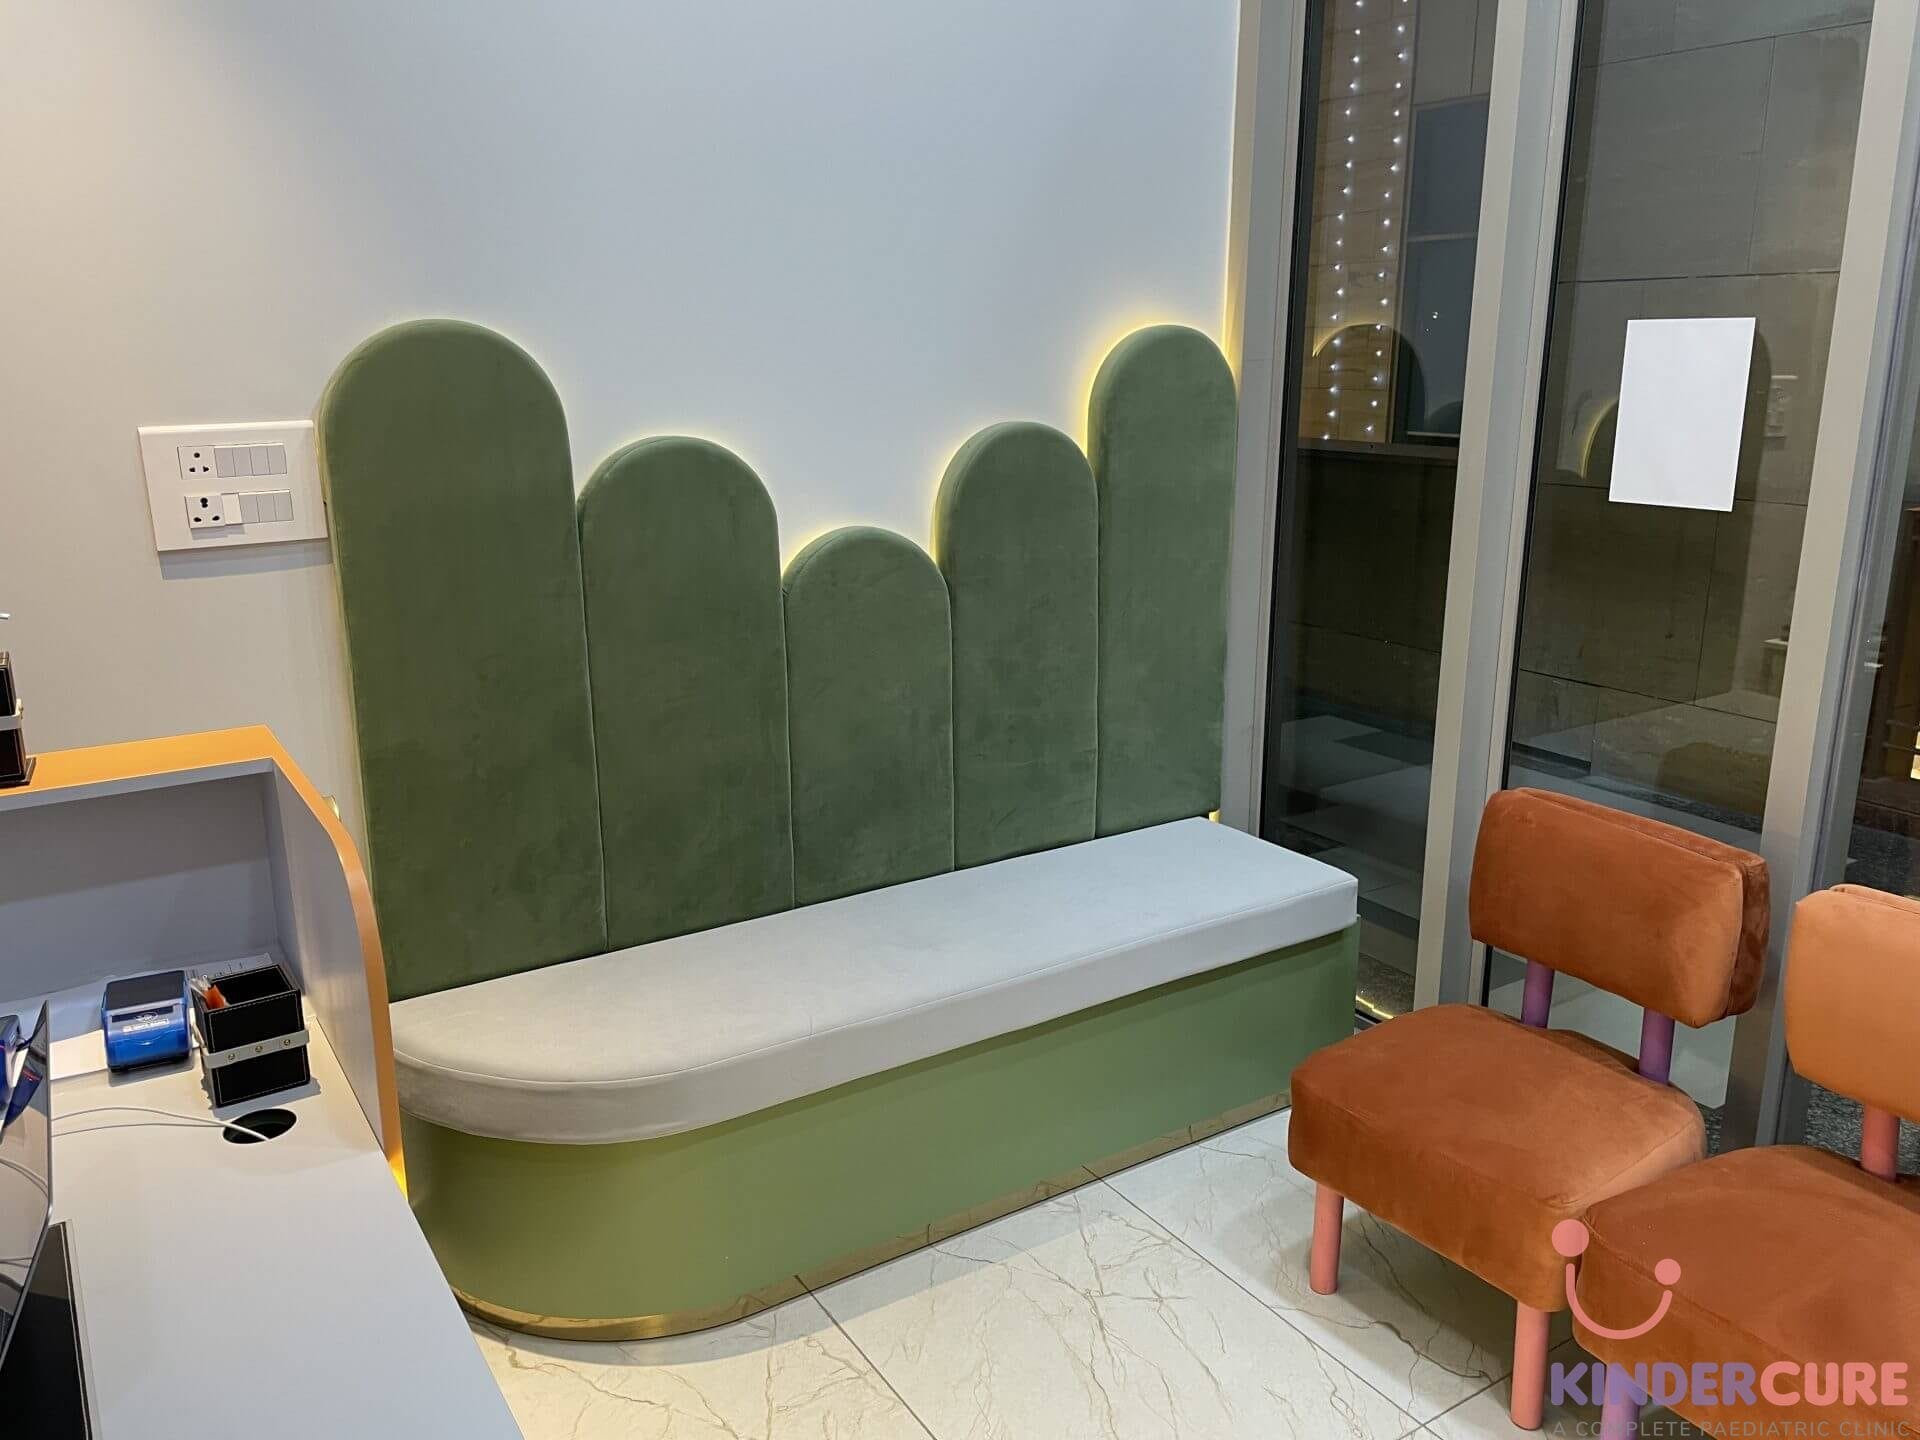 Bright and welcoming reception area of KinderCure Paediatric Clinic designed for children's comfort